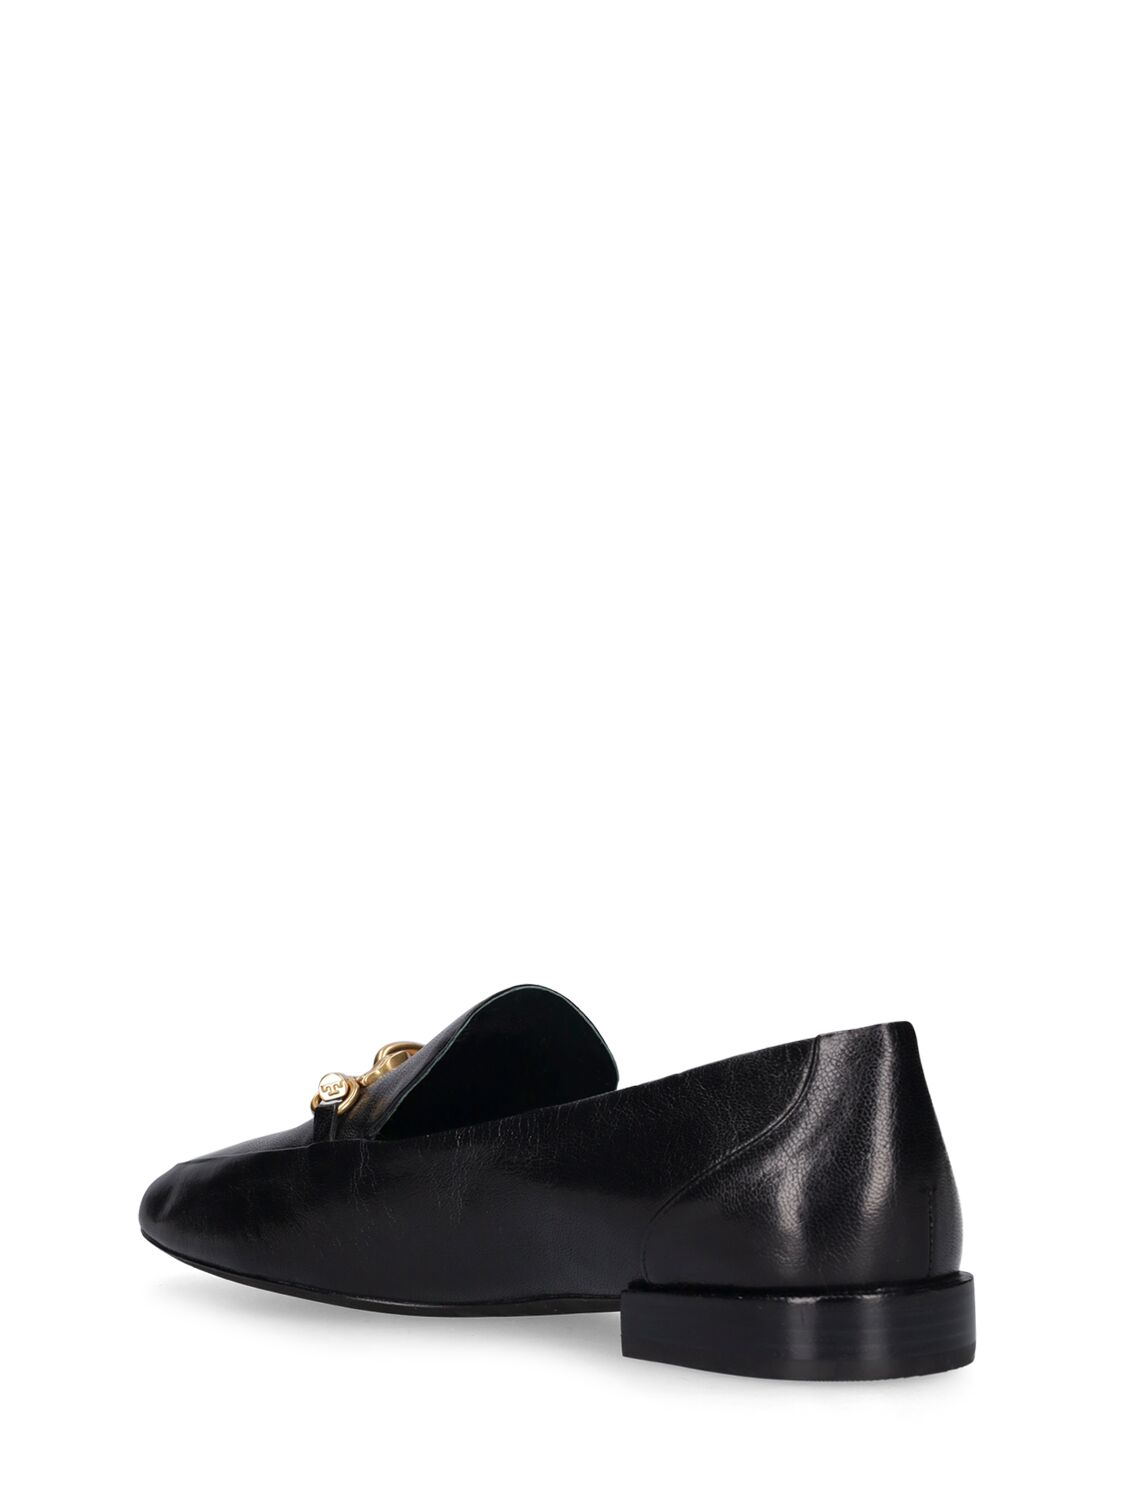 Shop Tory Burch 20mm Jessa Patent Leather Loafers In Black